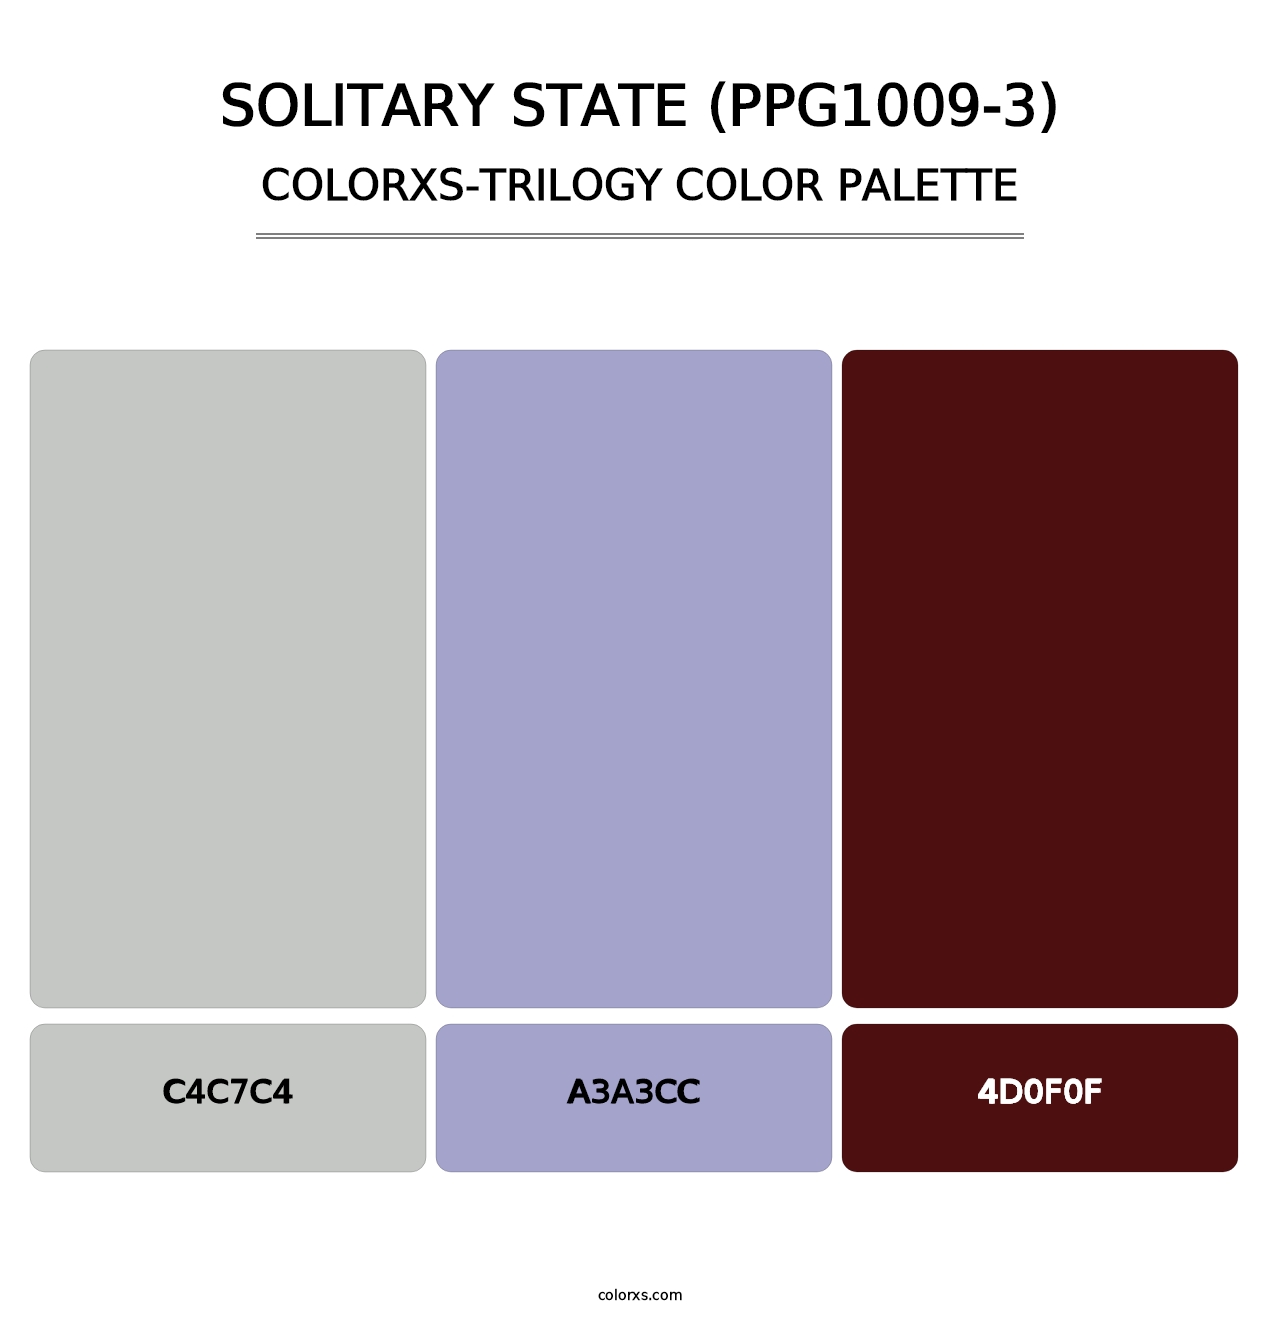 Solitary State (PPG1009-3) - Colorxs Trilogy Palette